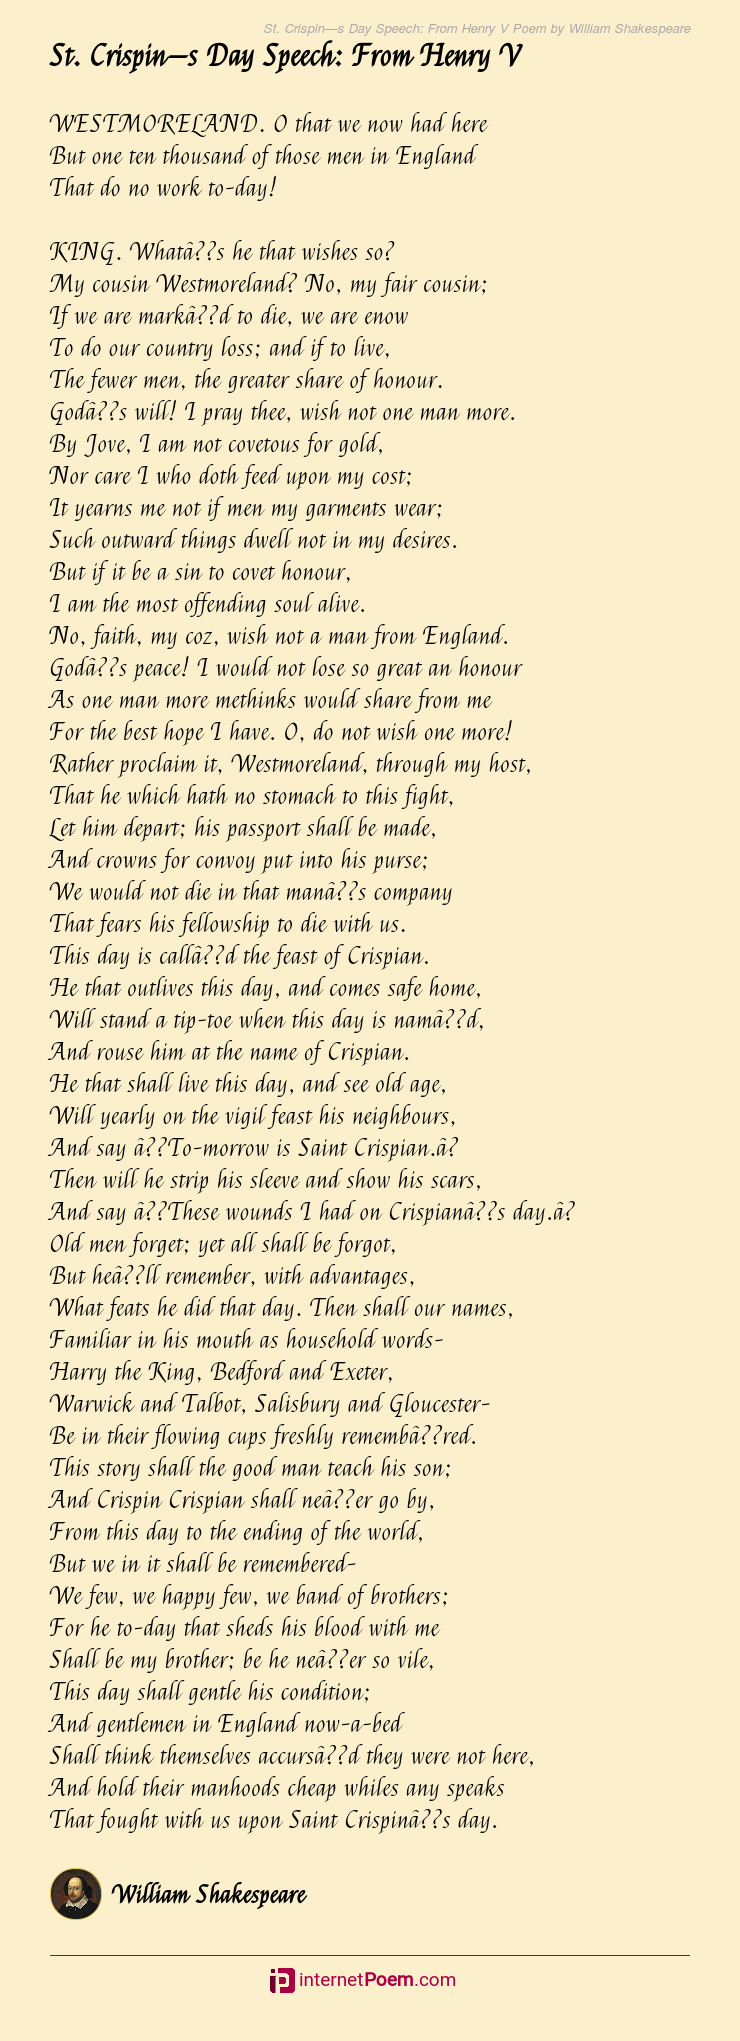 st-crispin-s-day-speech-from-henry-v-poem-by-william-shakespeare